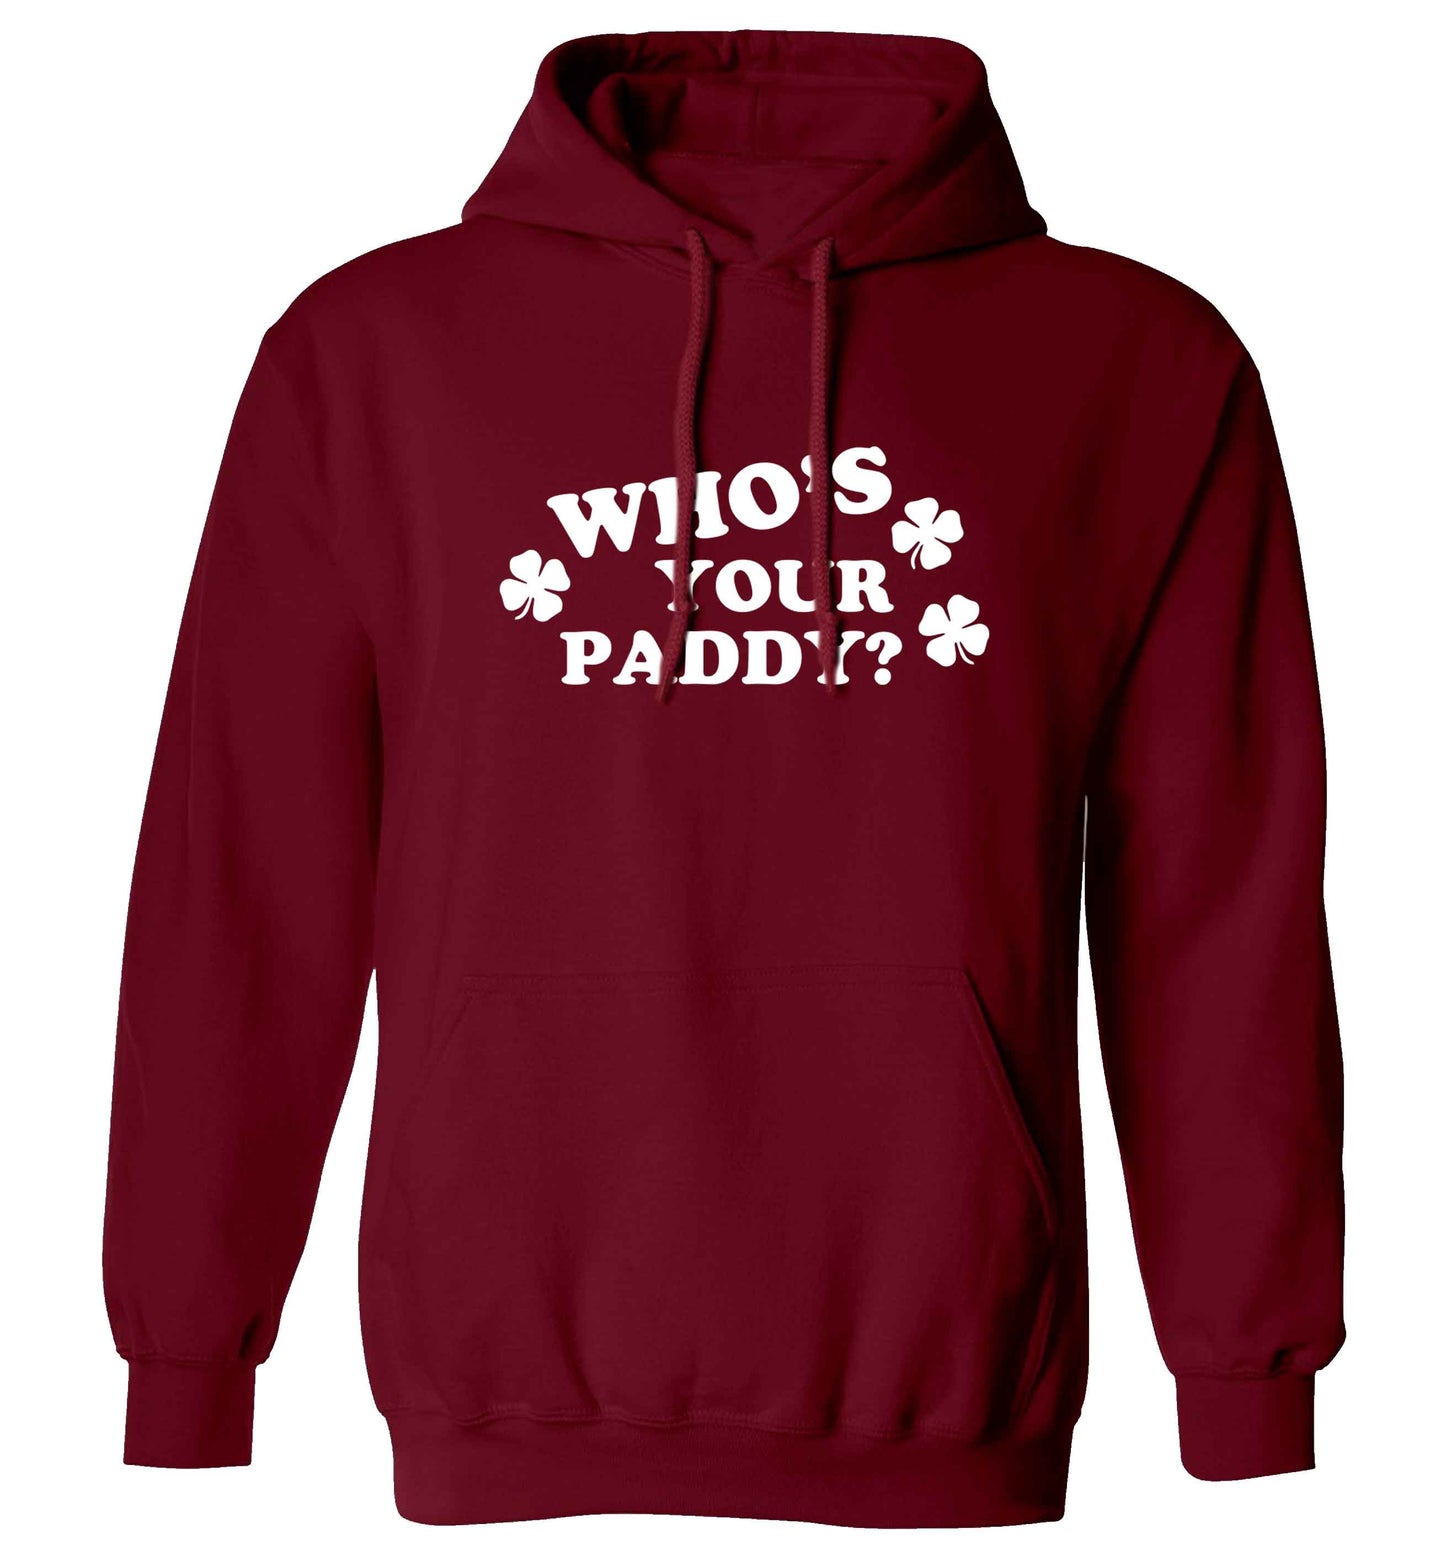 Who's your paddy? adults unisex maroon hoodie 2XL